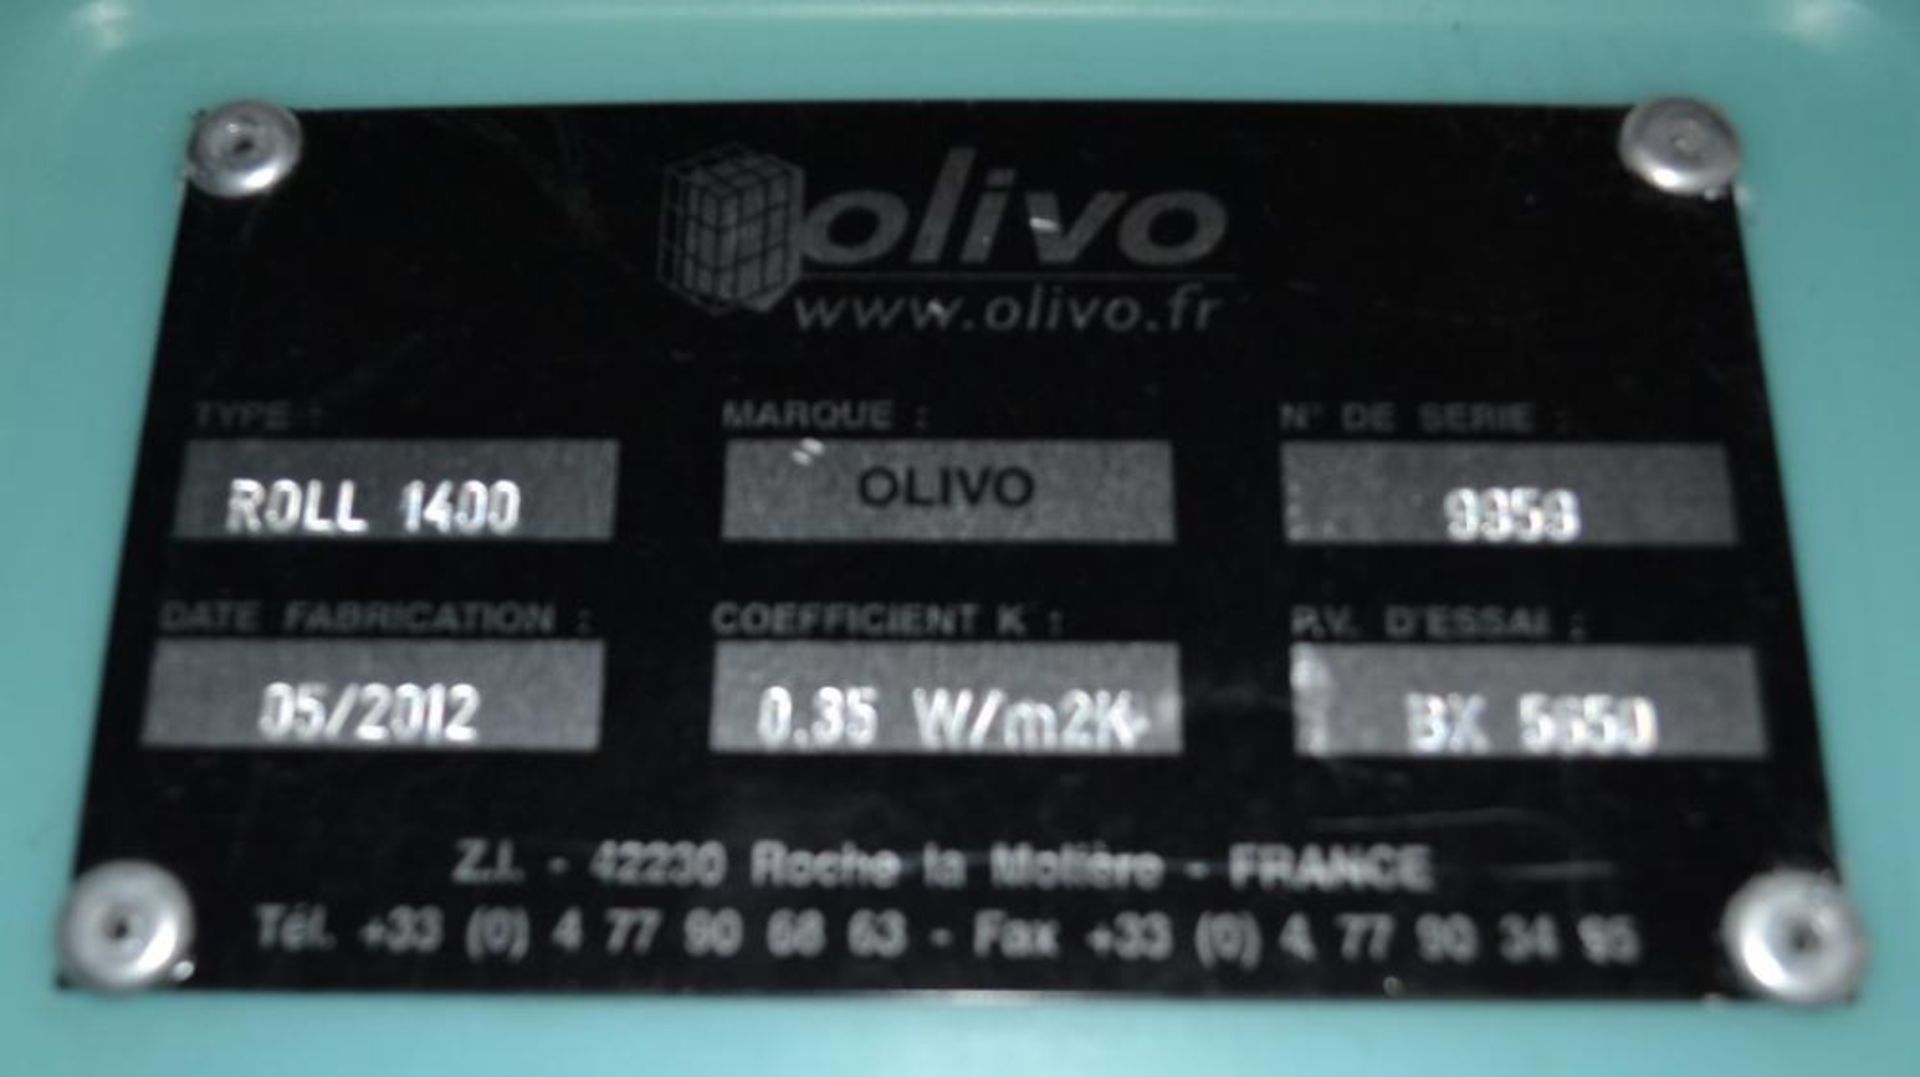 1 x Olivo Roll 1400 Thermo Container - 197x98x117cm - Ref: DRT0OLIVO - CL185 - Location: Stoke-on- - Image 5 of 10